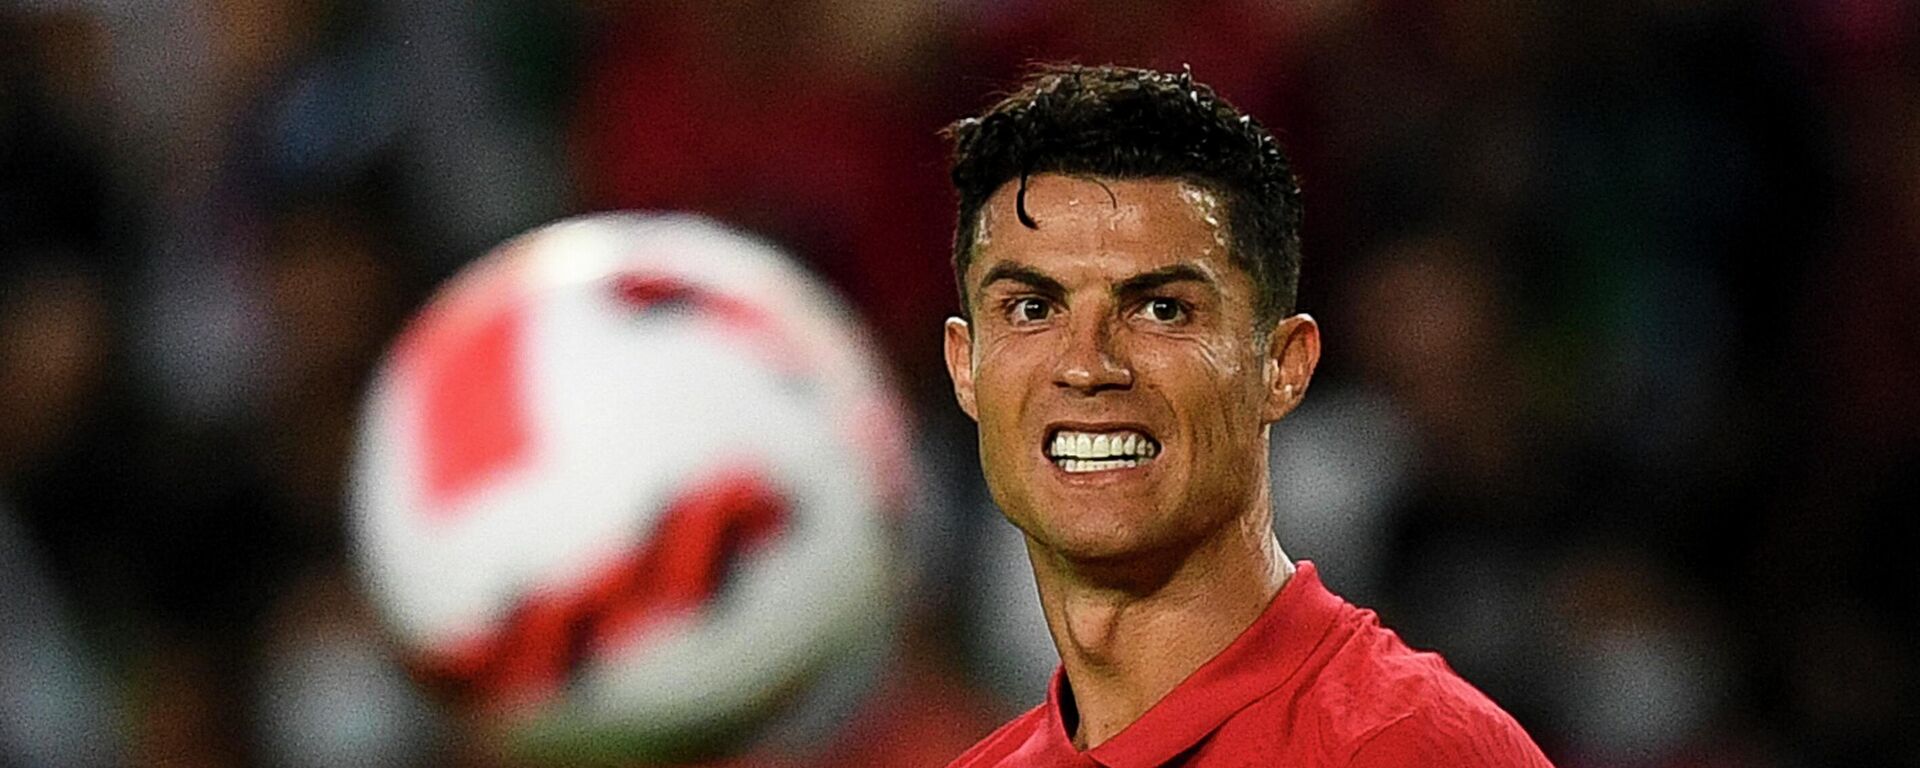 In this file photo taken on June 09, 2022, Portugal's forward Cristiano Ronaldo reacts during the UEFA Nations League, league A group 2 football match between Portugal and Czech Republic at the Jose Alvalade stadium in Lisbon. - Sputnik International, 1920, 18.07.2022